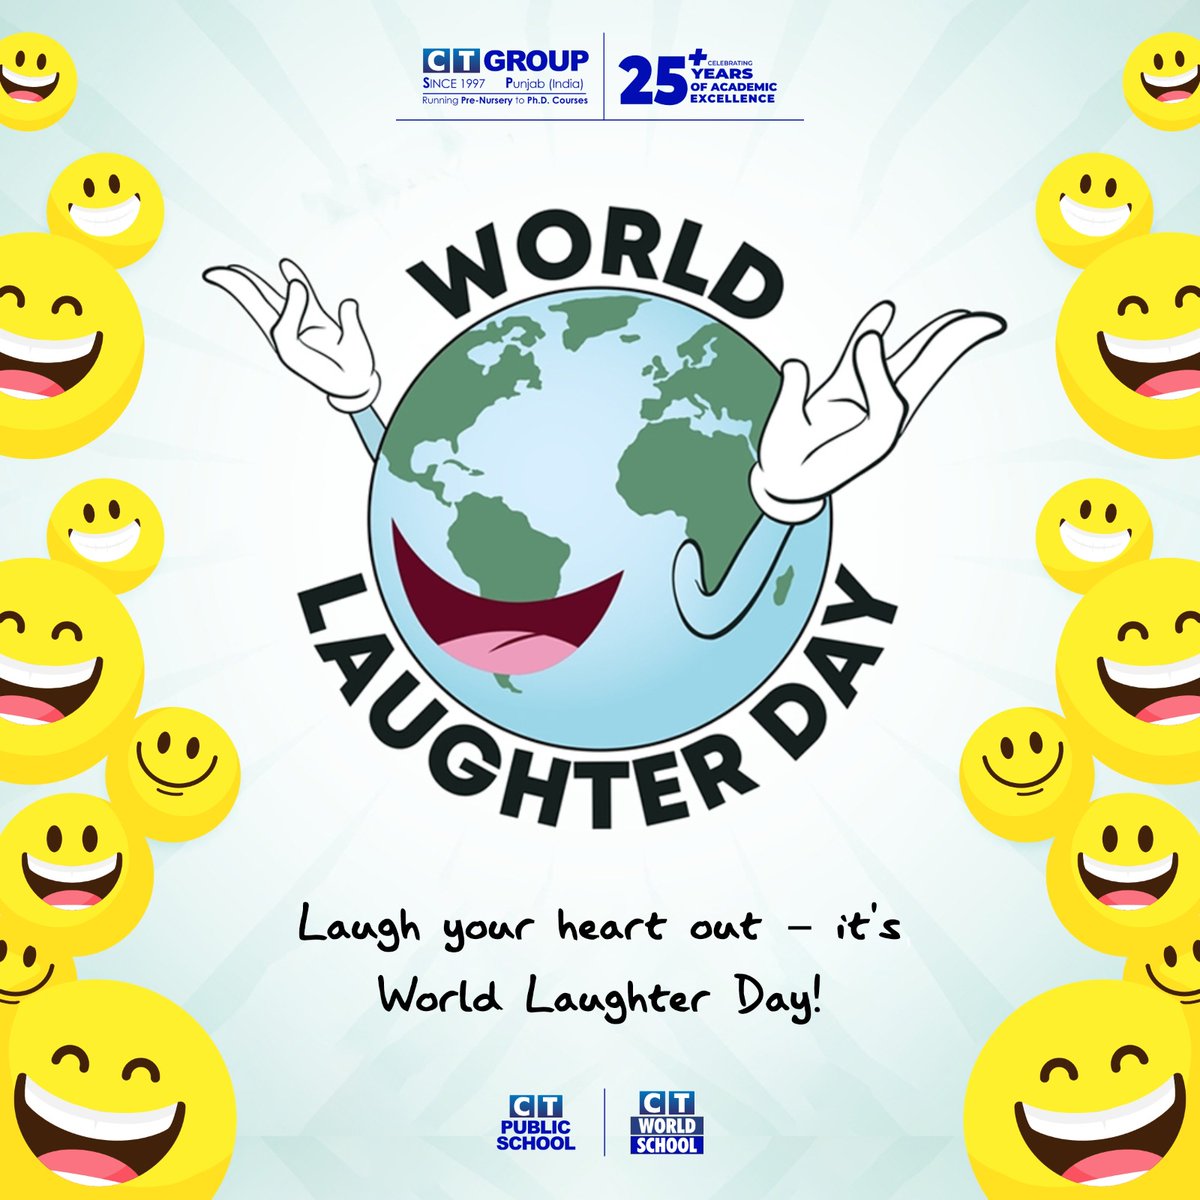 Let the laughter ripple, hearts giggle, and spirits soar! Happy World Laughter Day! 😄🌍 #ctgroup #morningpost #ctu #ctps #ctw #teamct #ctians #ctfamily #happyworldlaughterday